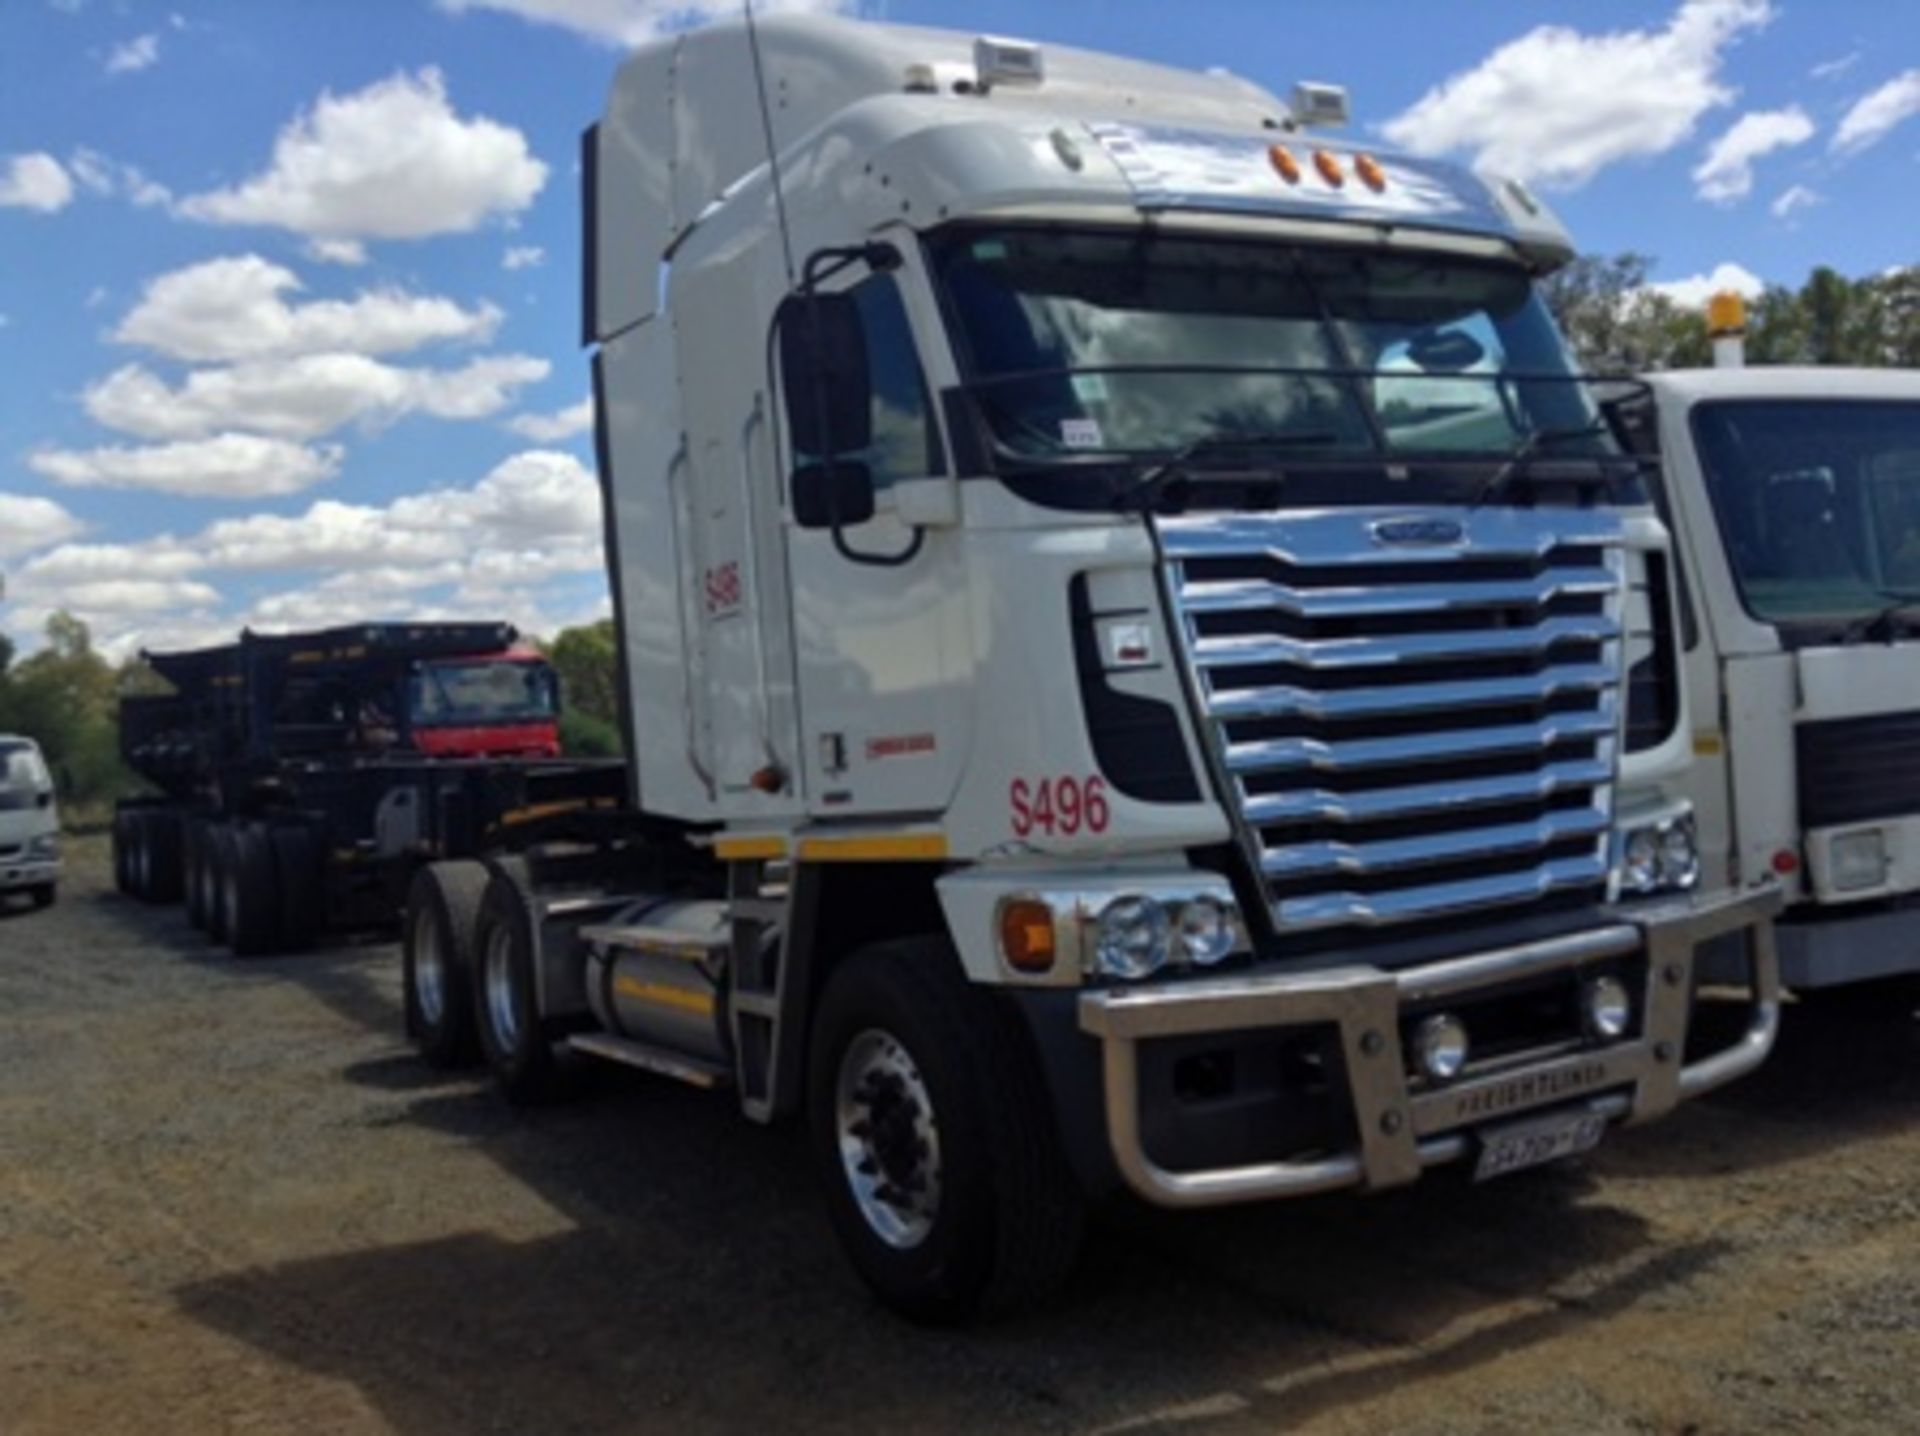 2013 FREIGHTLINER ARGOSY 90 CUM 500 NG DOUBLE AXLE HORSE KM NOT VISIBLE- 14 DAY PAPER DELAY